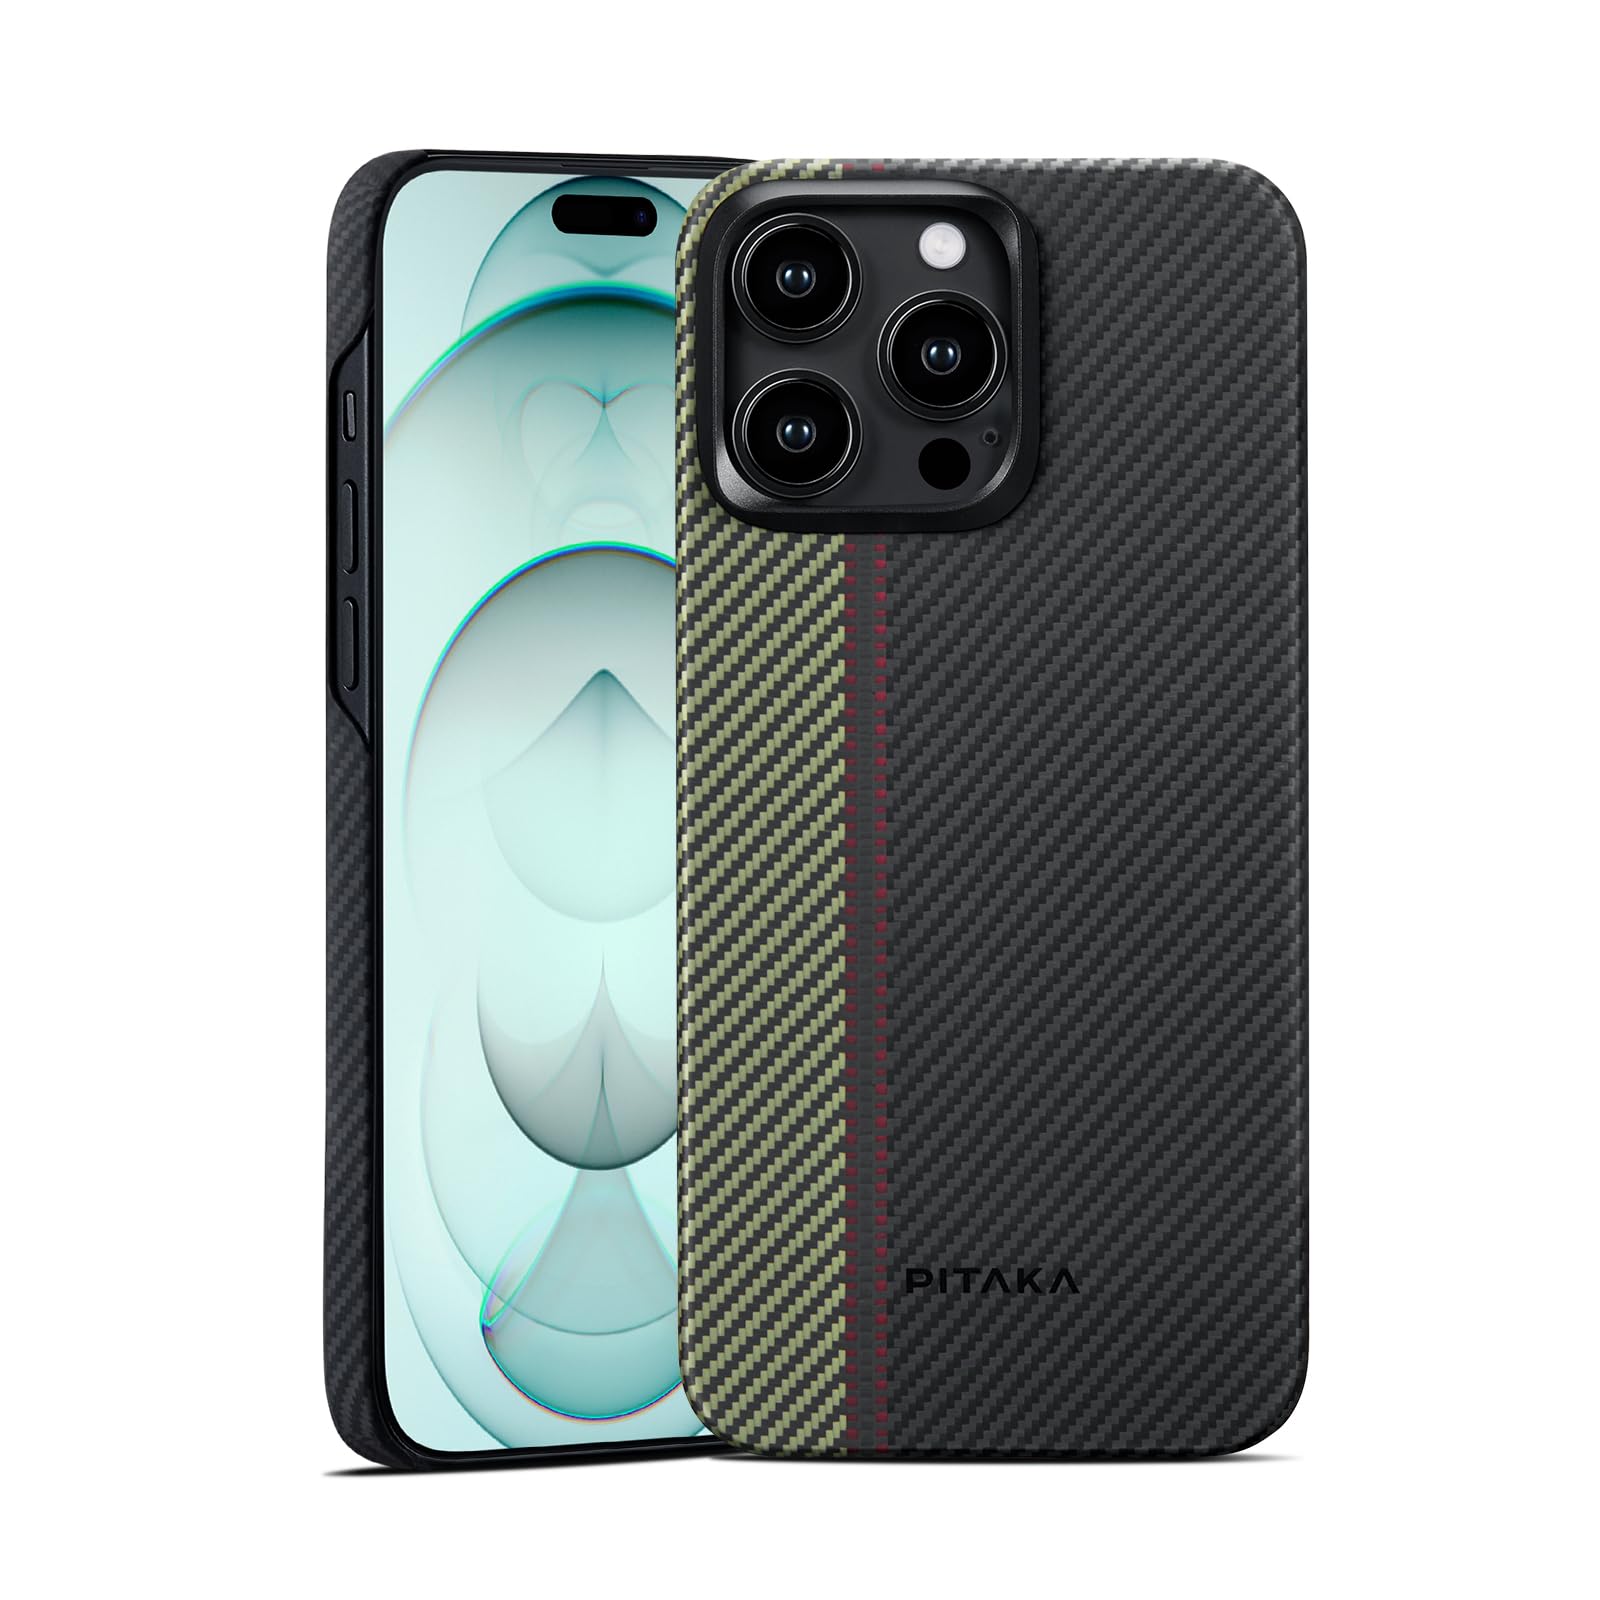 PITAKA Case for iPhone 15 Pro Max Compatible with MagSafe, Slim & Light iPhone 15 Pro Max Case 6.7-inch with a Case-Less Touch Feeling, 600D Aramid Fiber Made [Fusion Weaving MagEZ Case 4 - Overture]